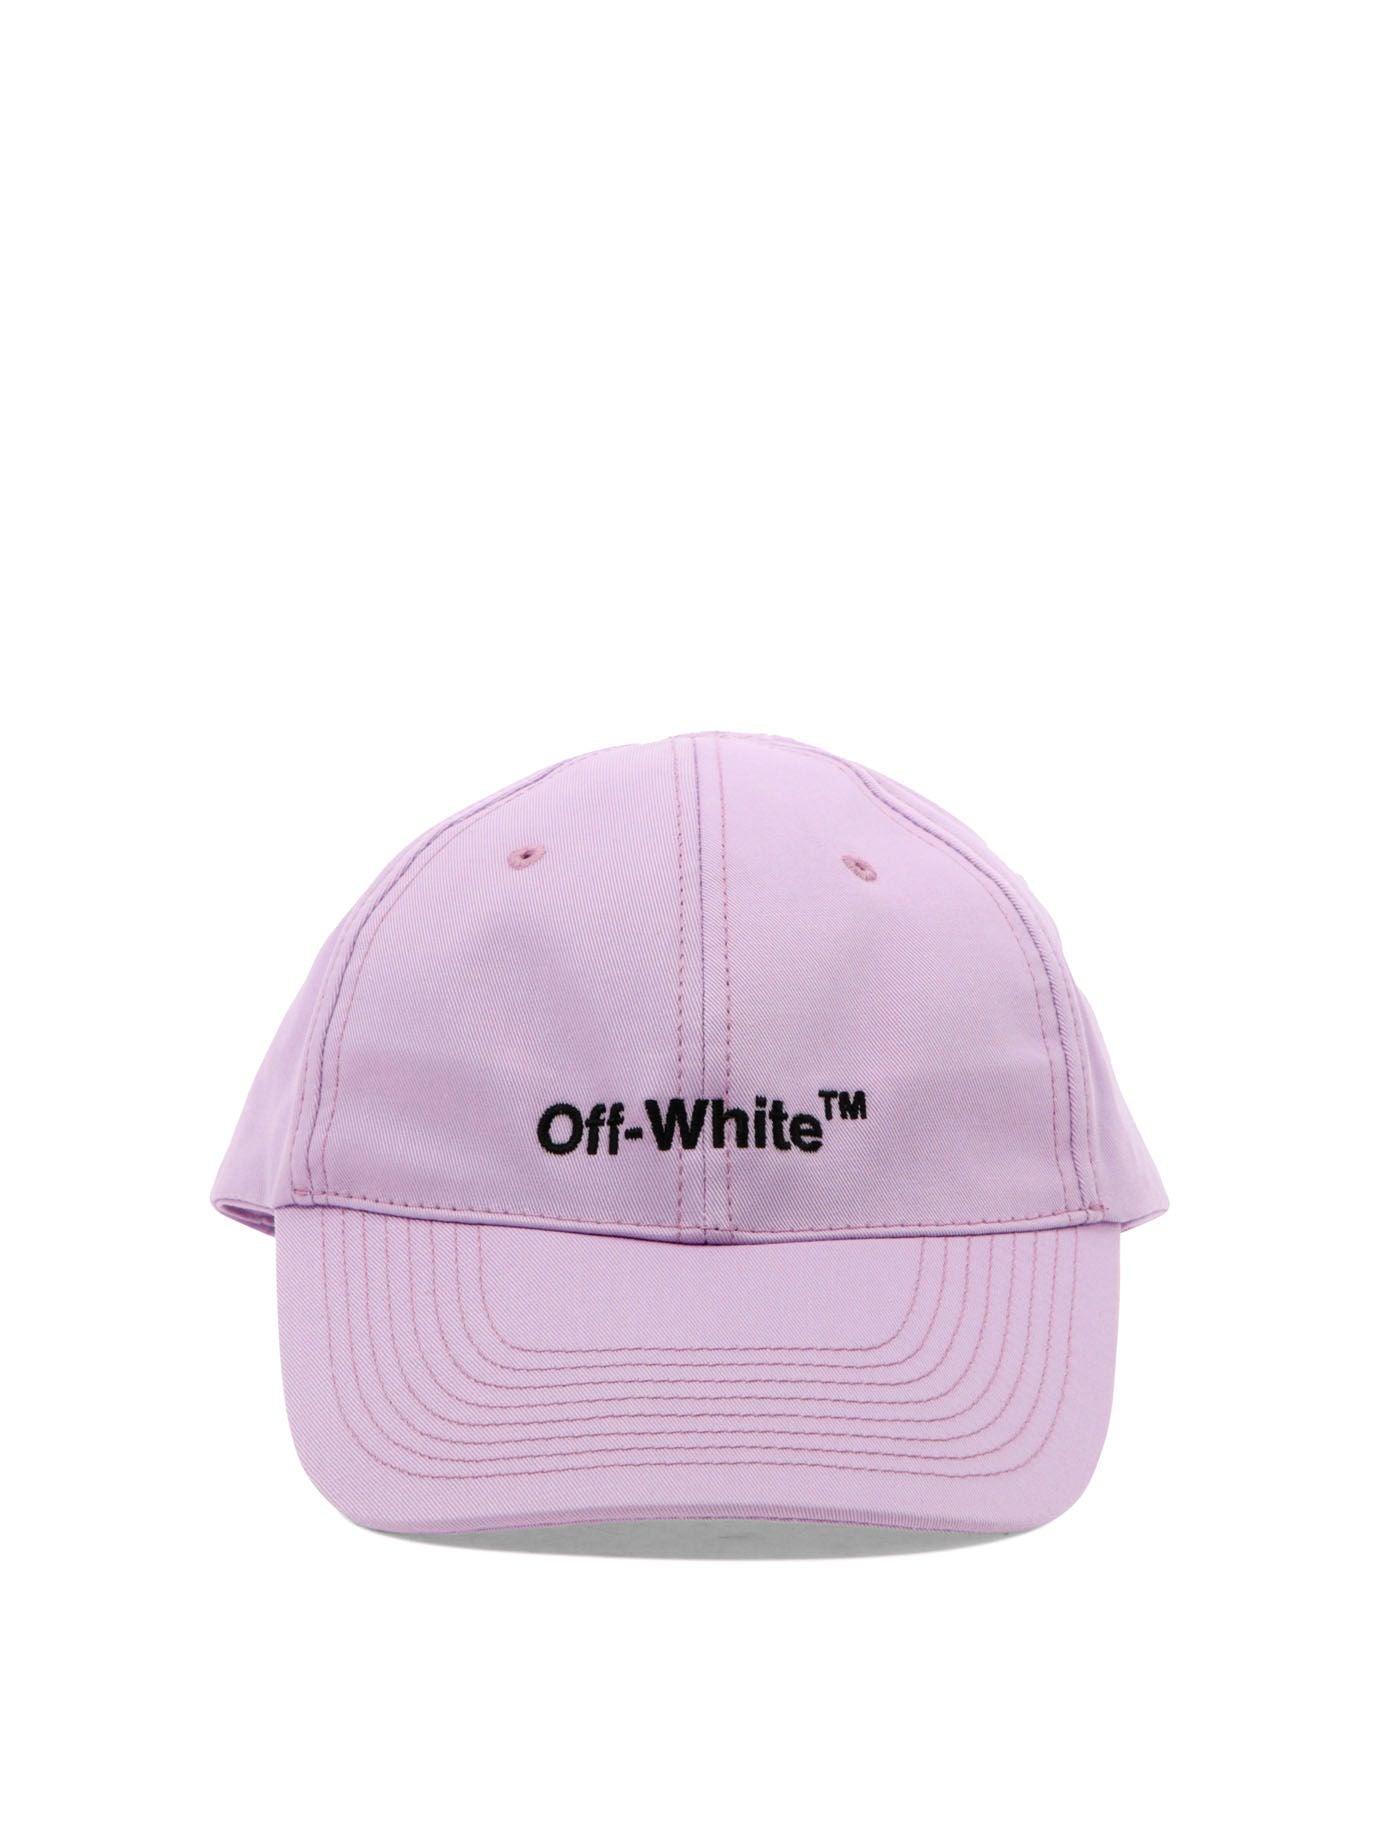 Off-White c/o Virgil Abloh Cotton Arrows Logo-embroidered Cap in Purple Pink Womens Hats Off-White c/o Virgil Abloh Hats 